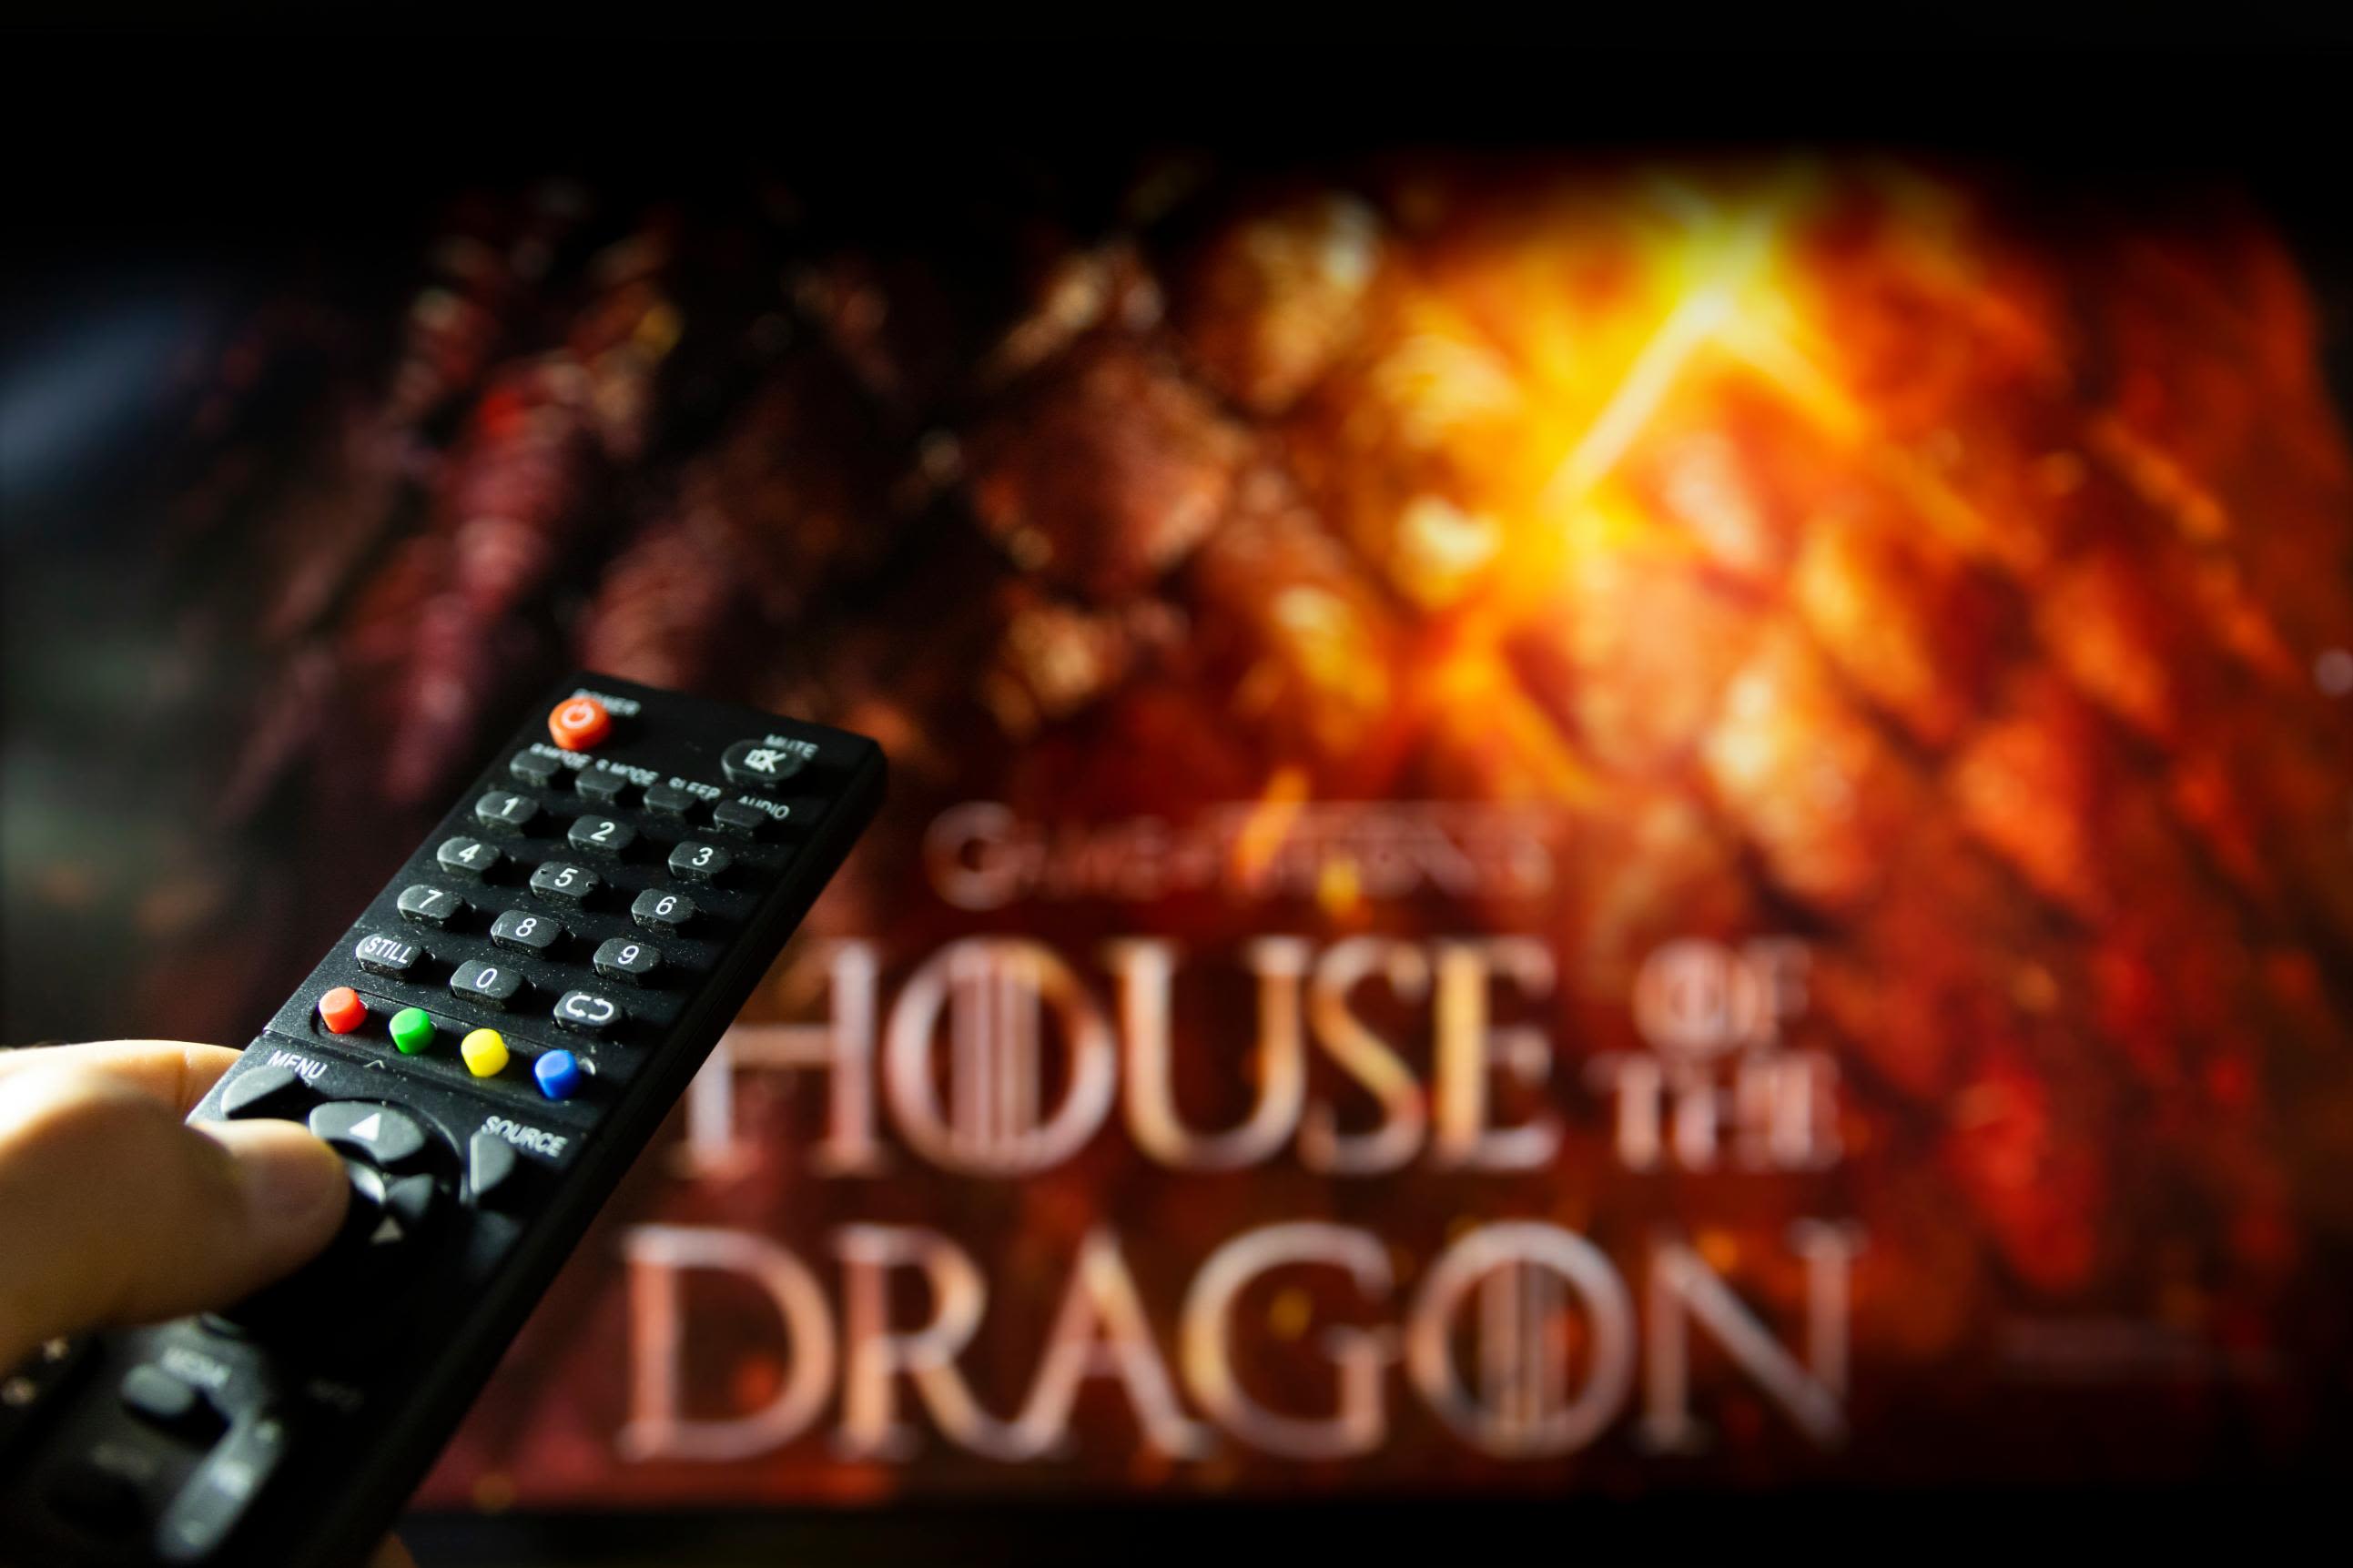 Episode 9 is currently the third highest rated episode among IMDB users. :  r/HouseOfTheDragon